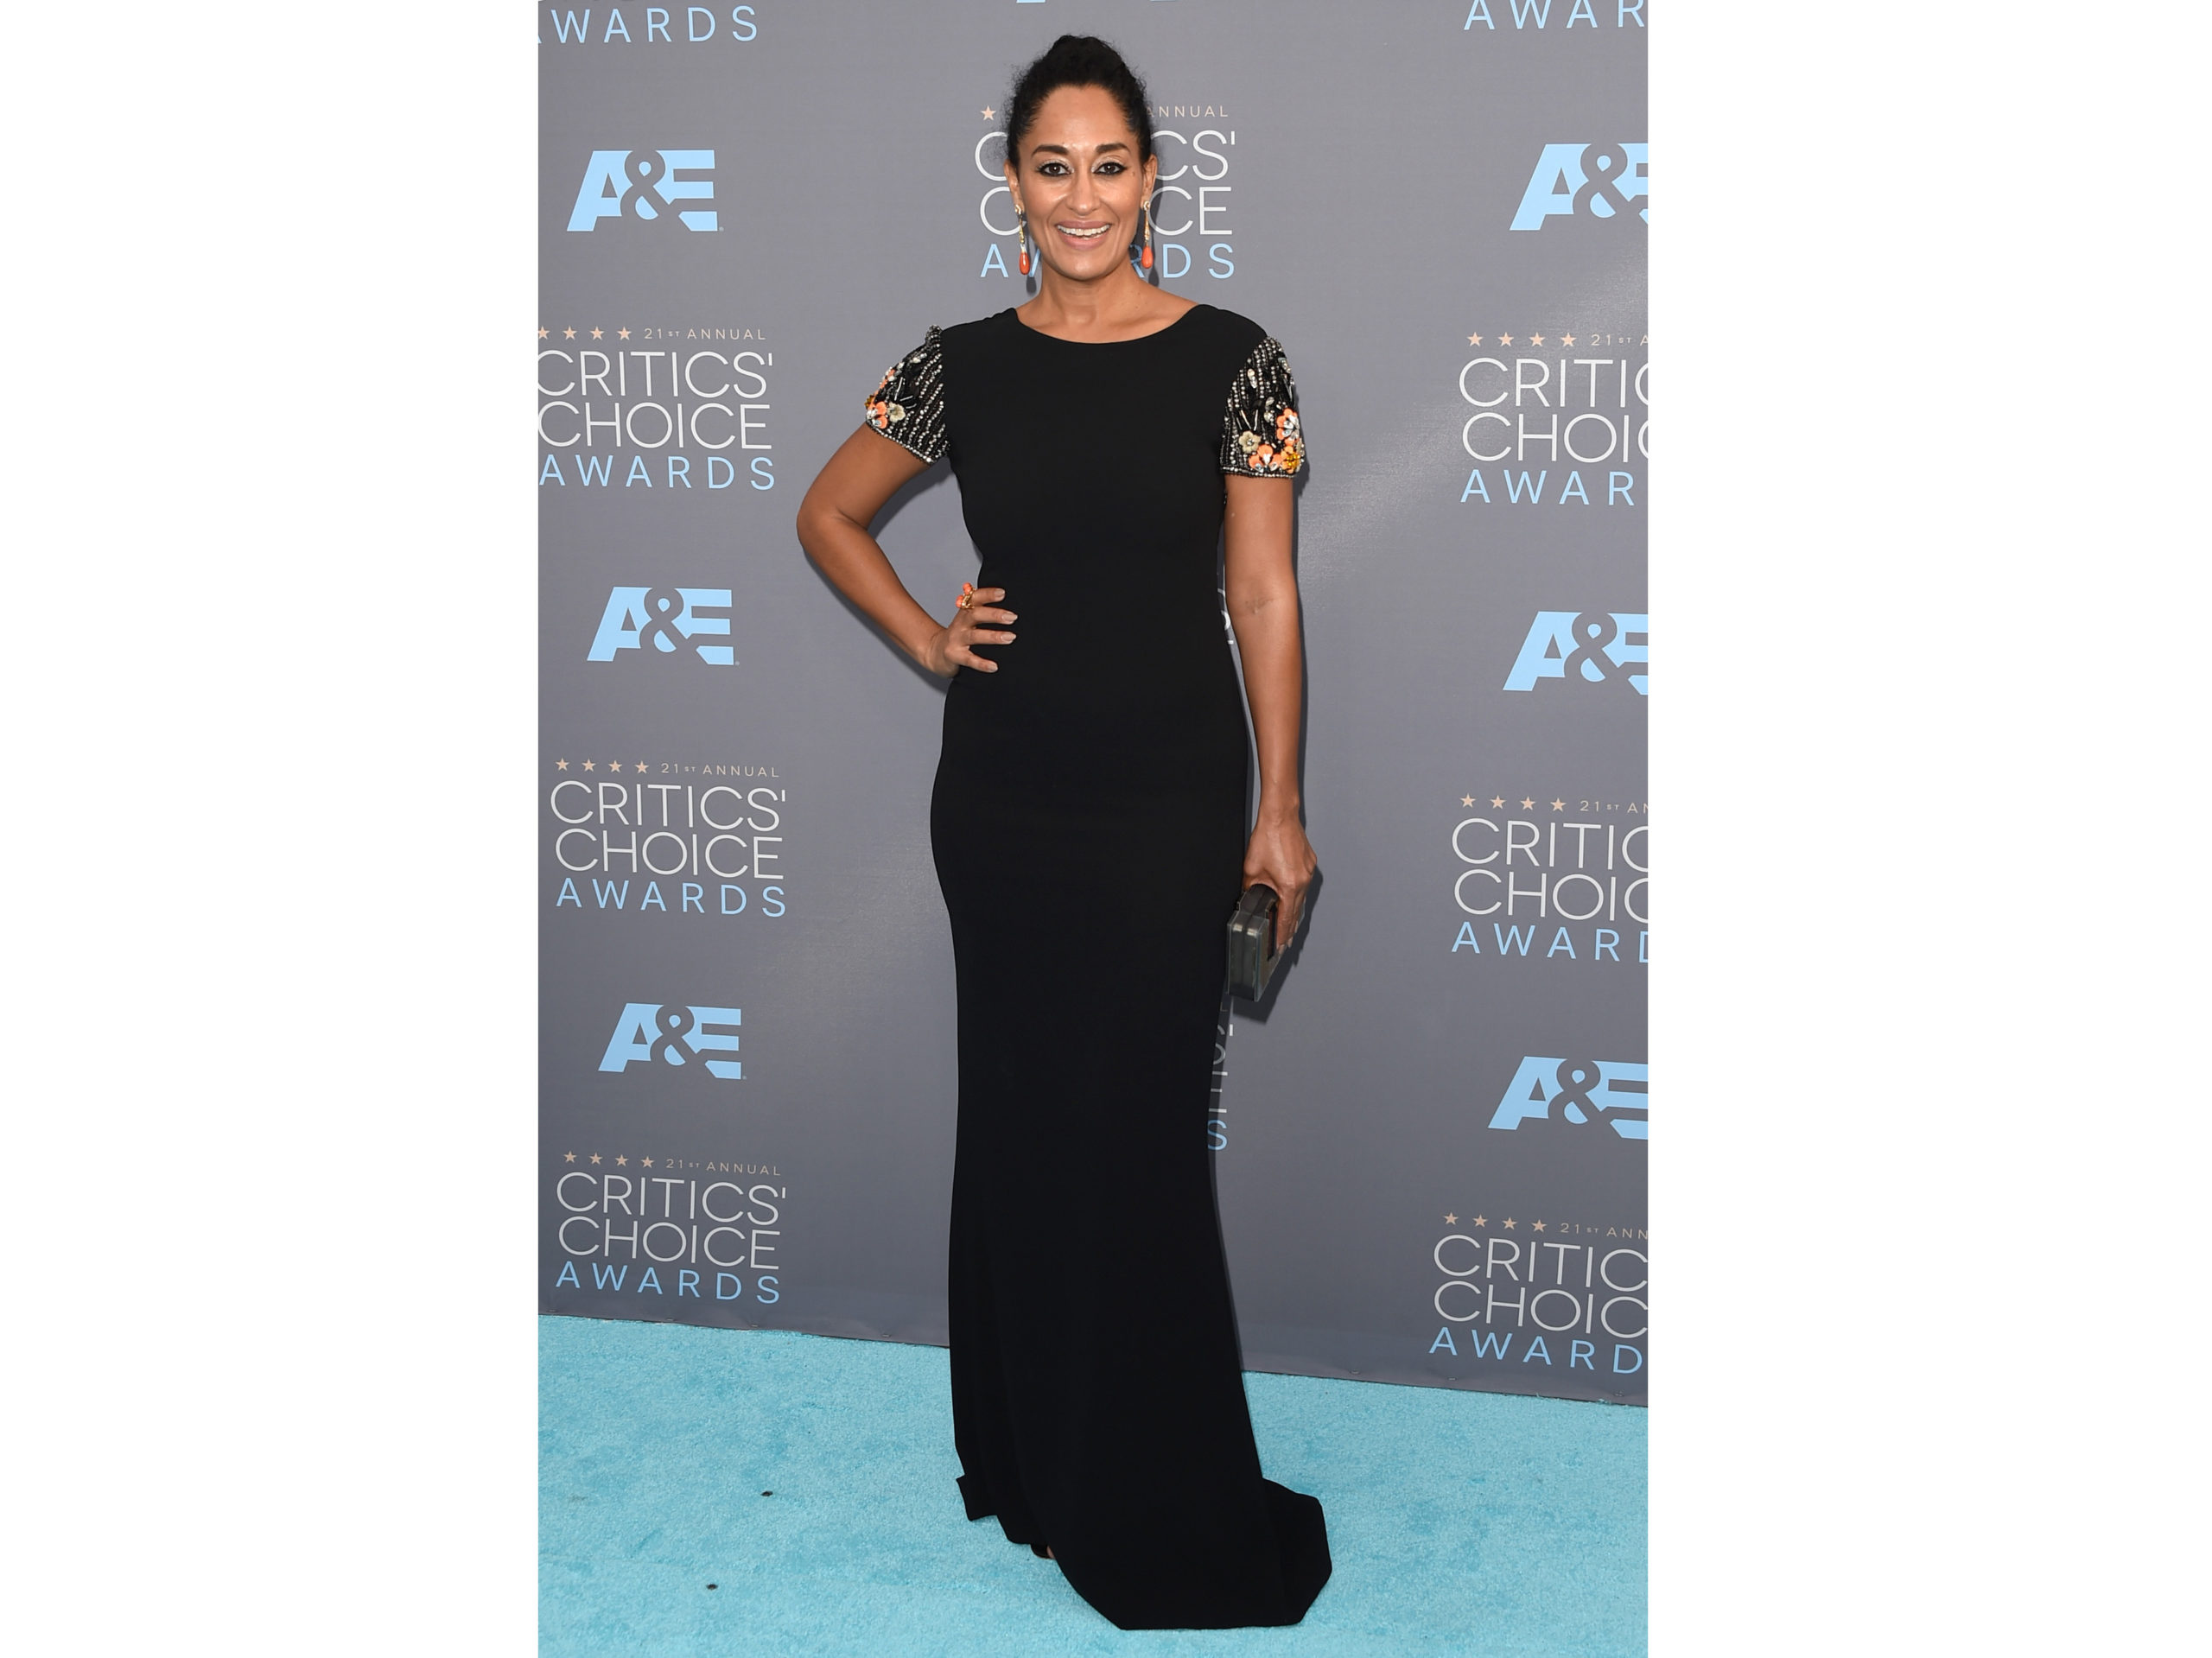 Tracee Ellis Ross attends the 21st Annual Critics' Choice Awards at Barker Hangar on January 17, 2016